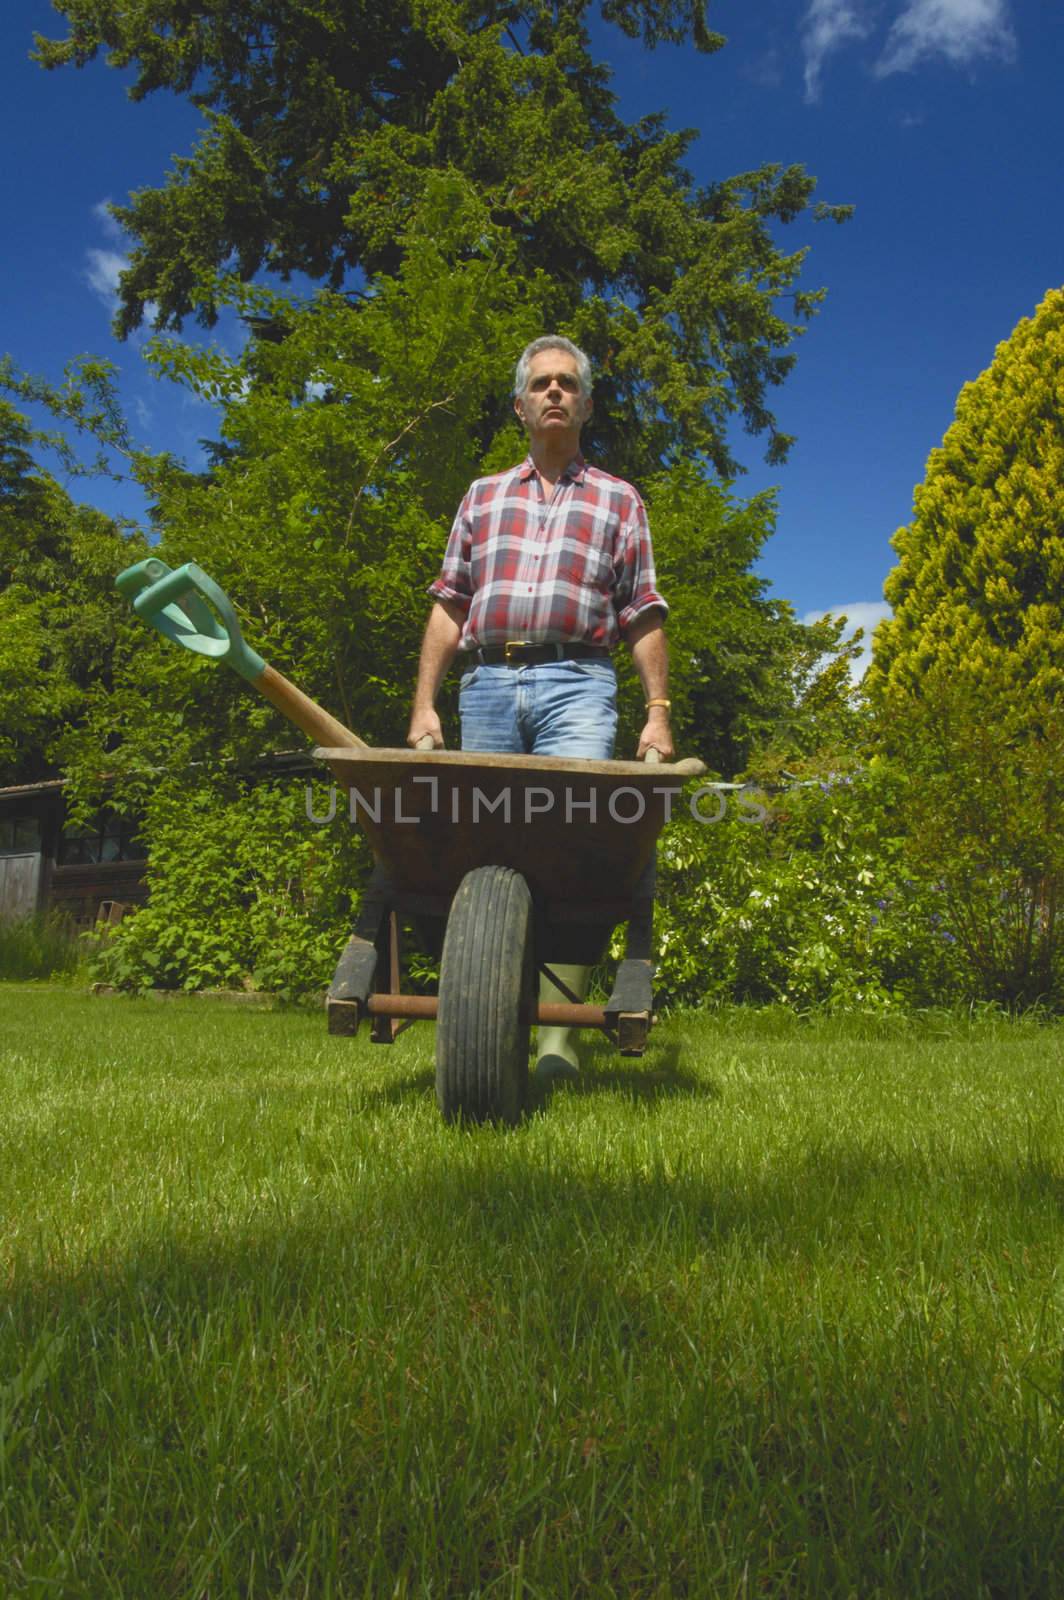 A gardener pushing a wheelbarrow with tools, taken from a low viewpoint. Space for text on the green grass in front  of wheelbarrow.